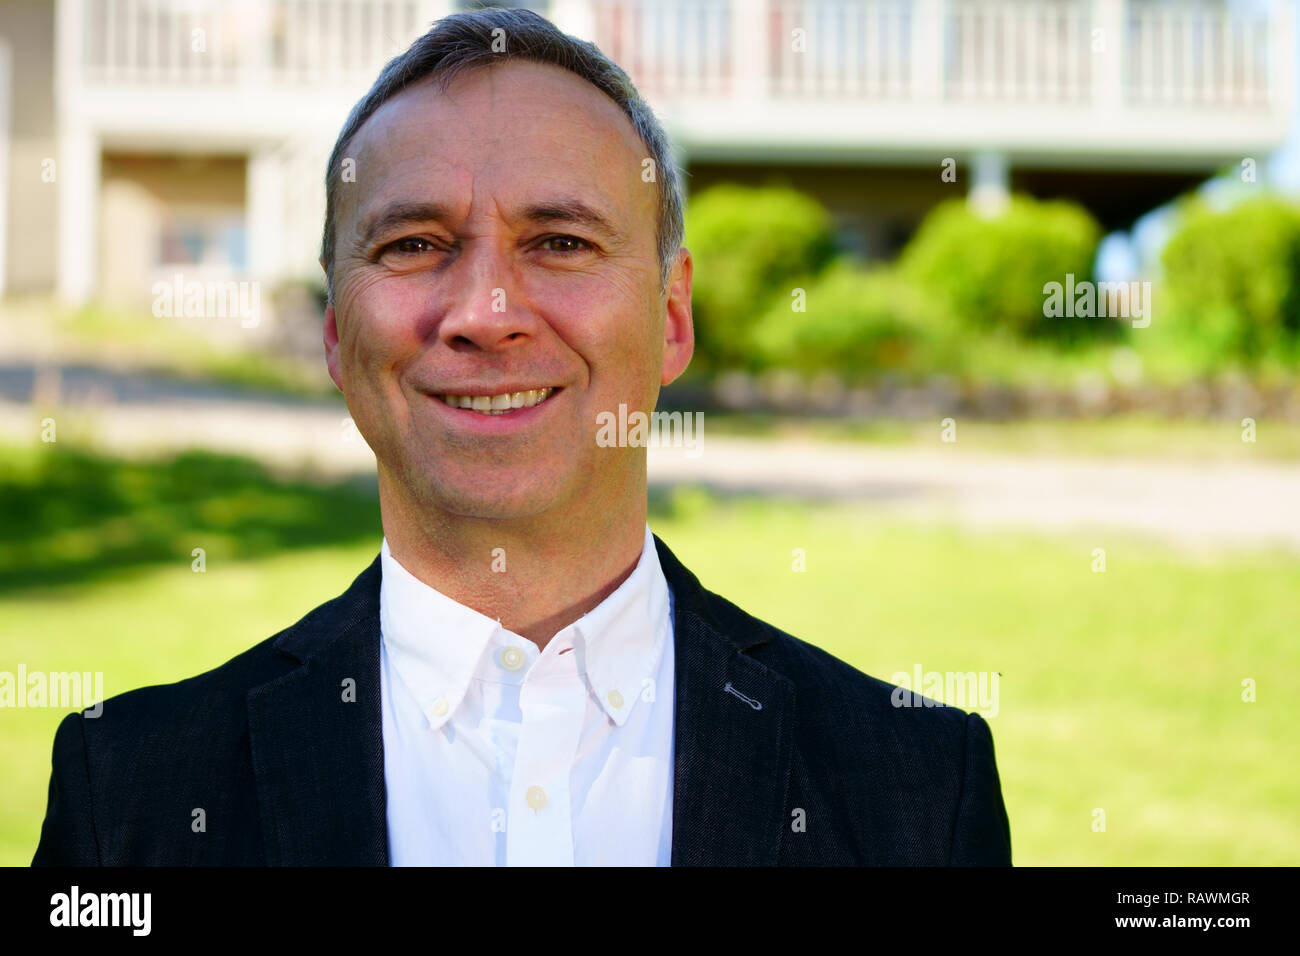 An outdoor close up portrait of a proud caucasian man wearing a white shirt, a black coat and smiling at the camera. Stock Photo